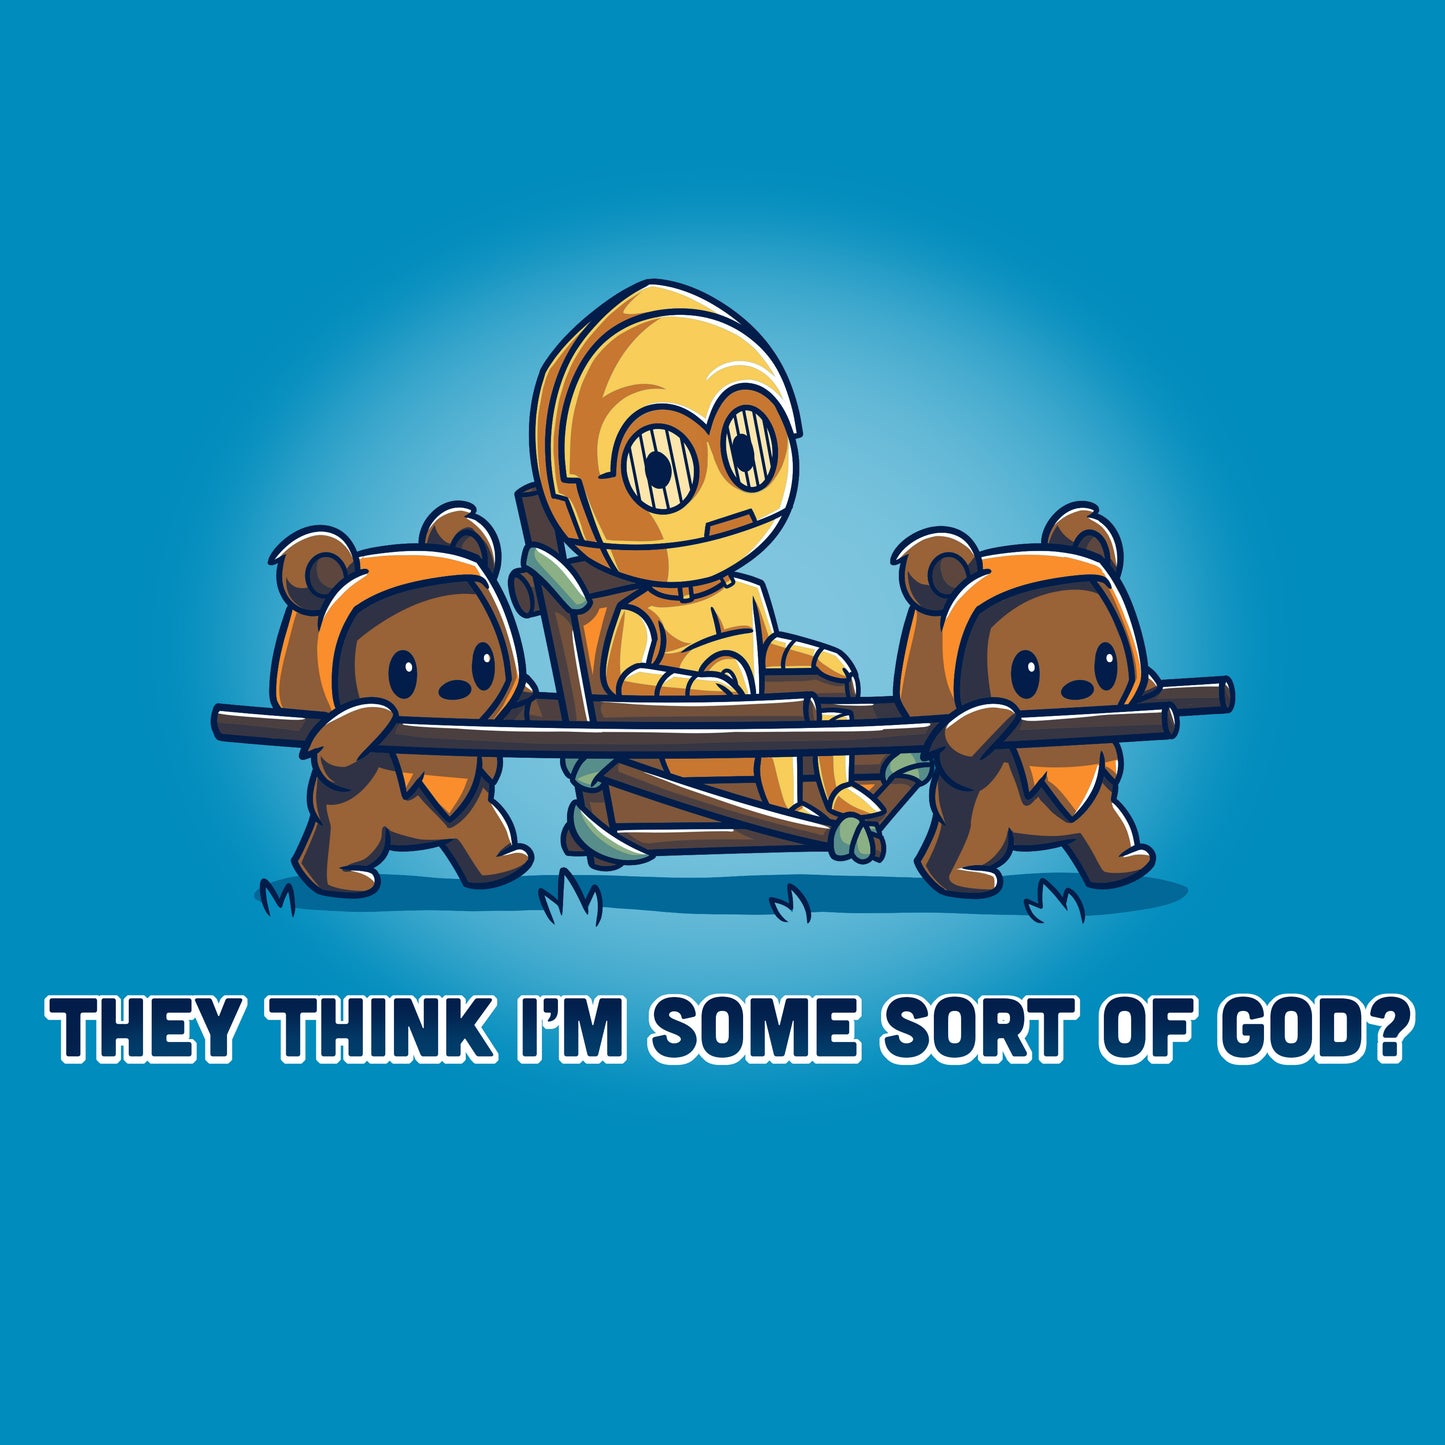 Officially licensed Star Wars cartoon characters, C3PO and Ewoks, holding two "They Think I'm Some Sort of God?" bears.